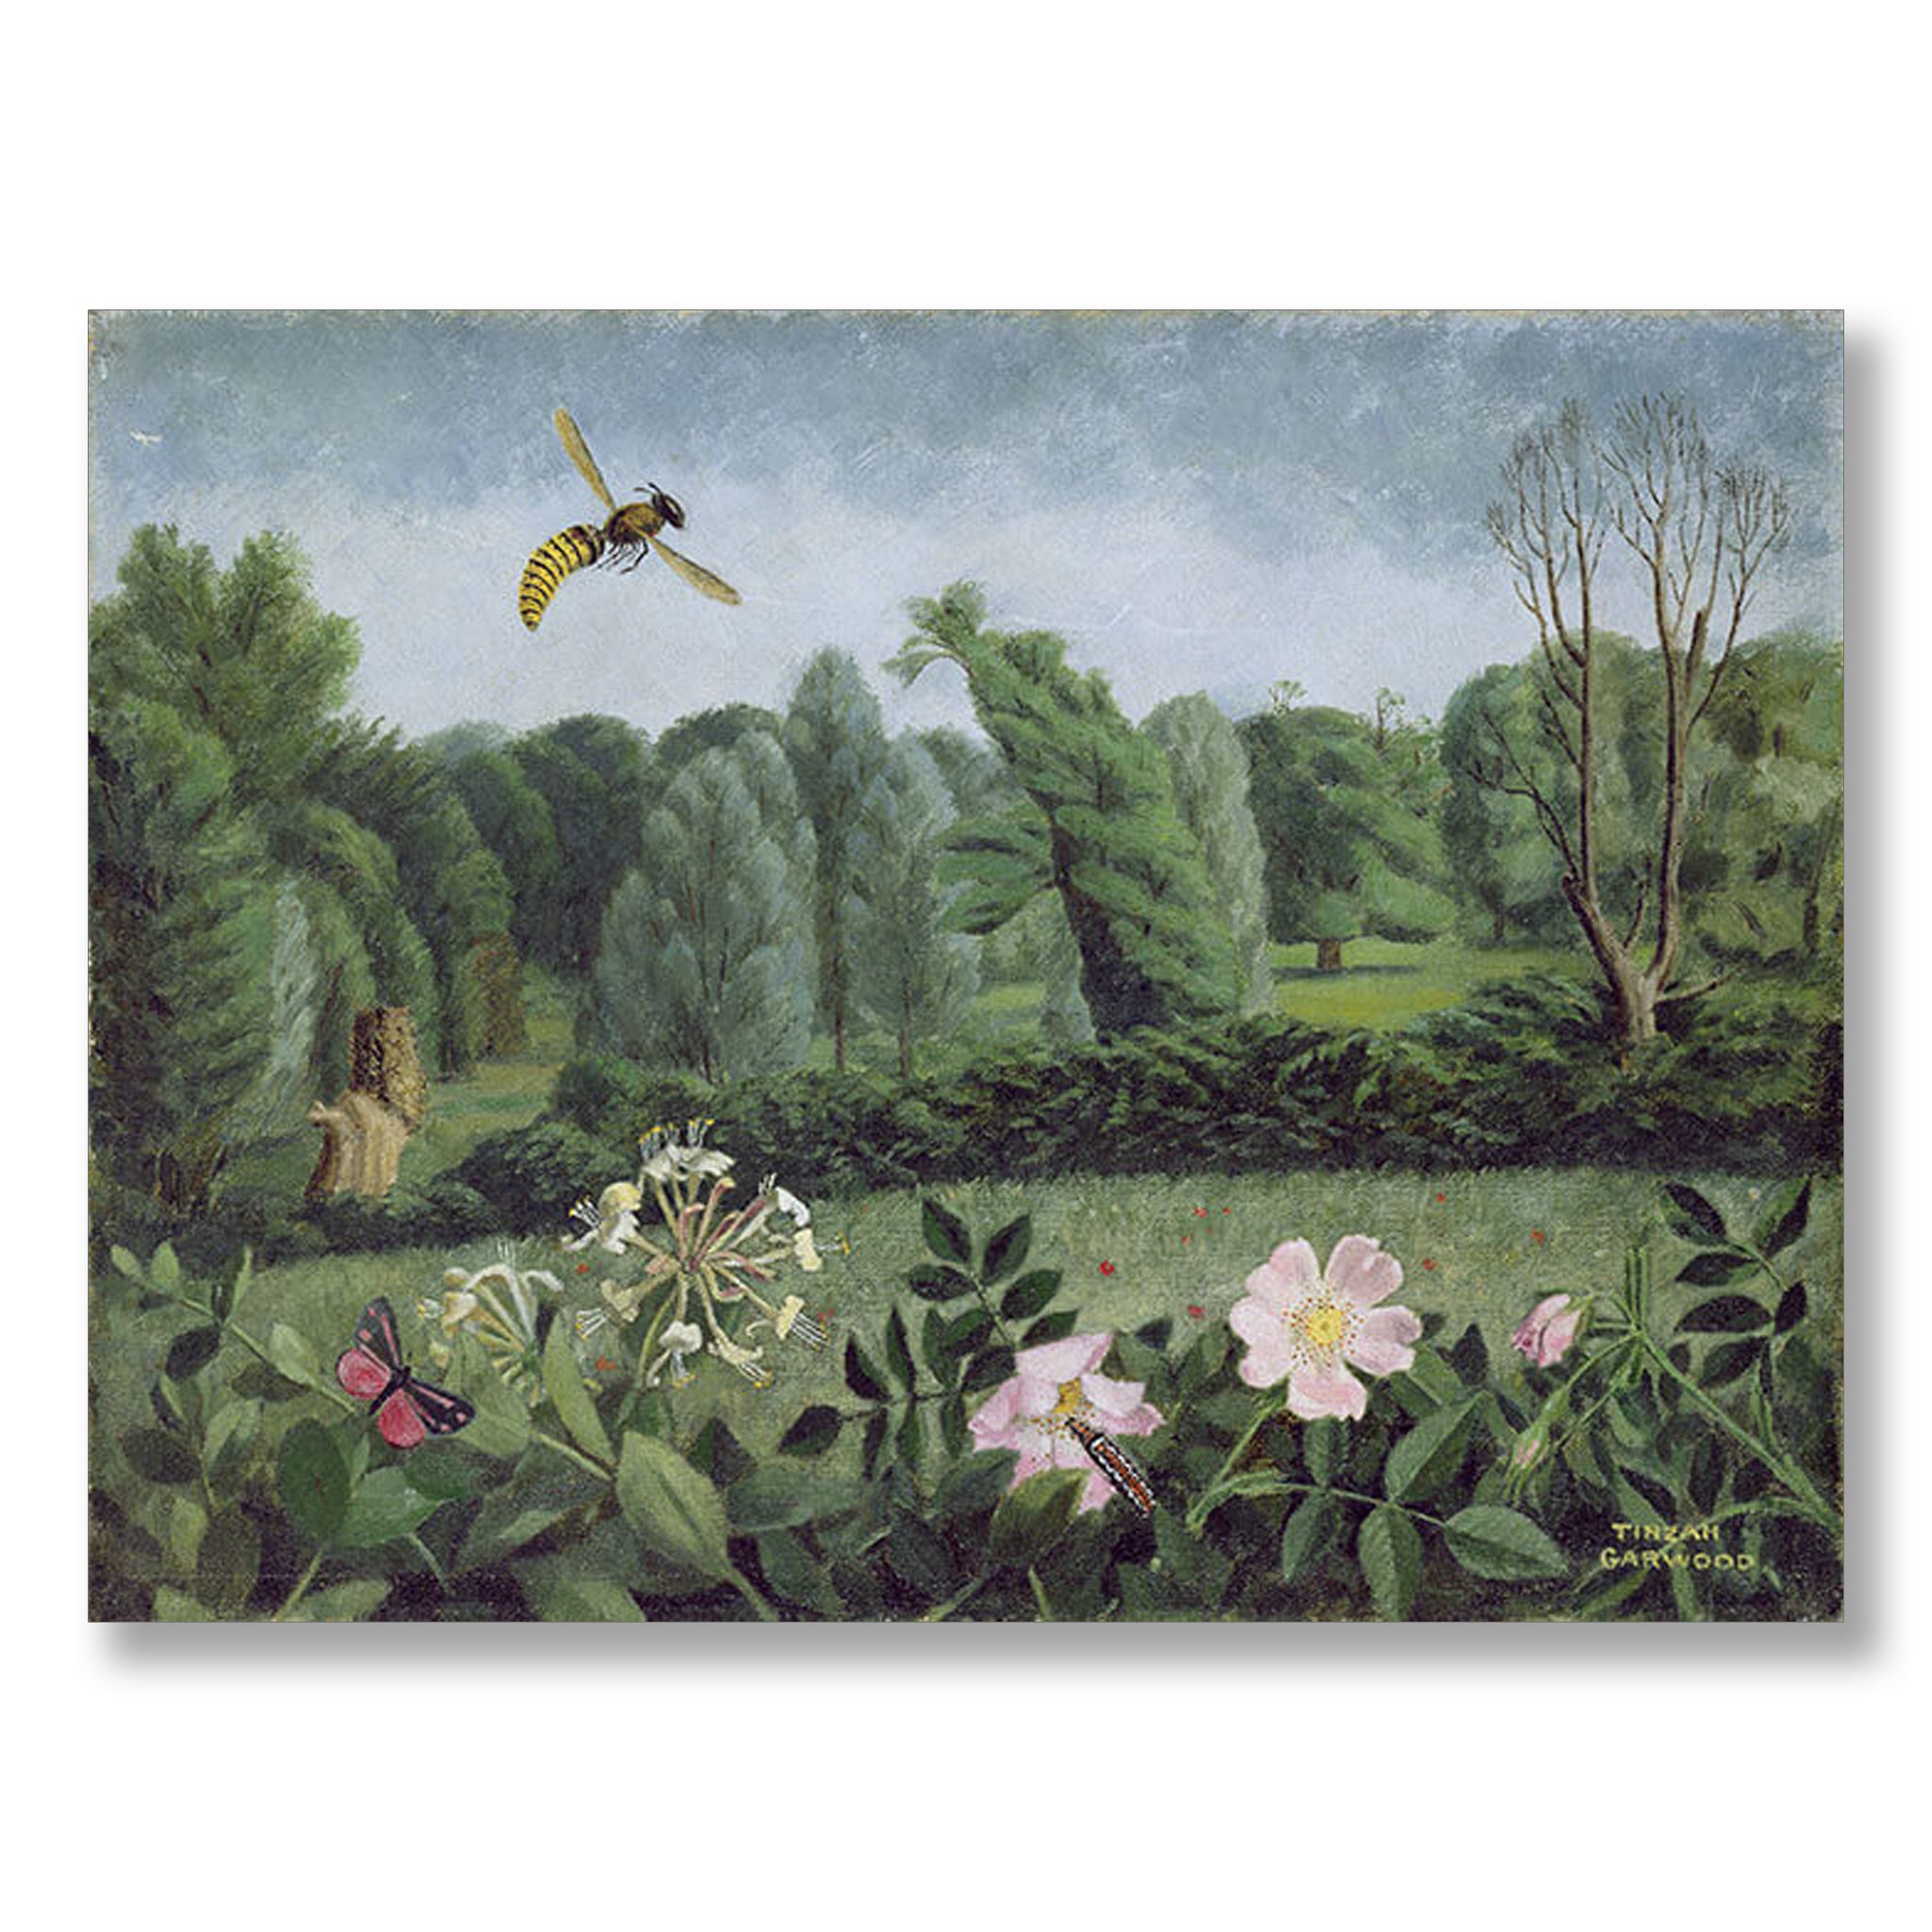 Hornet & Wild Rose by Tirzah Ravilious